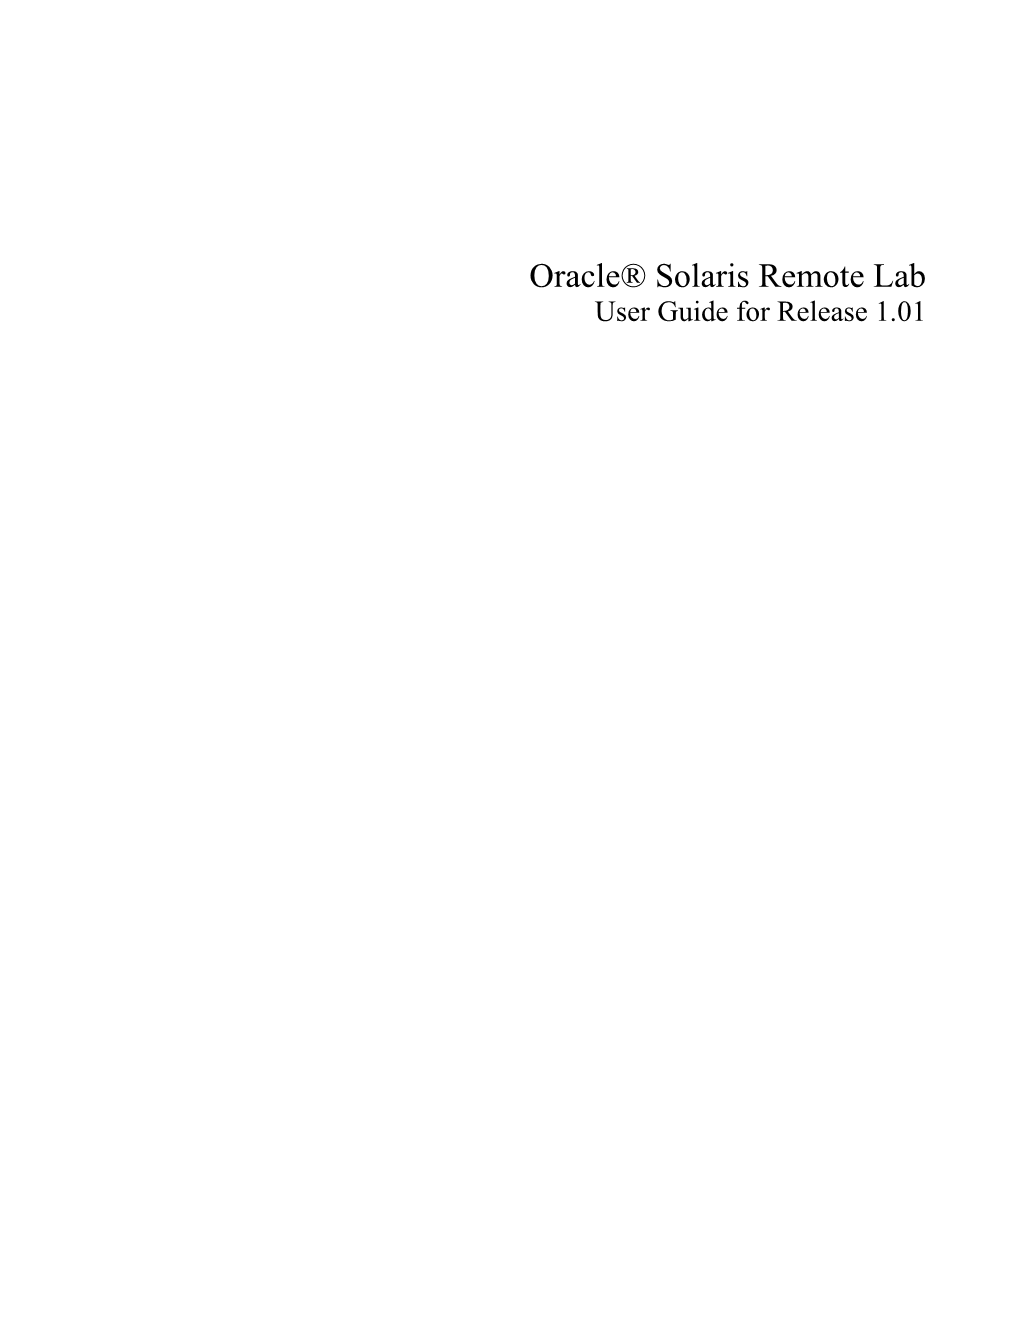 Oracle® Solaris Remote Lab User Guide for Release 1.01